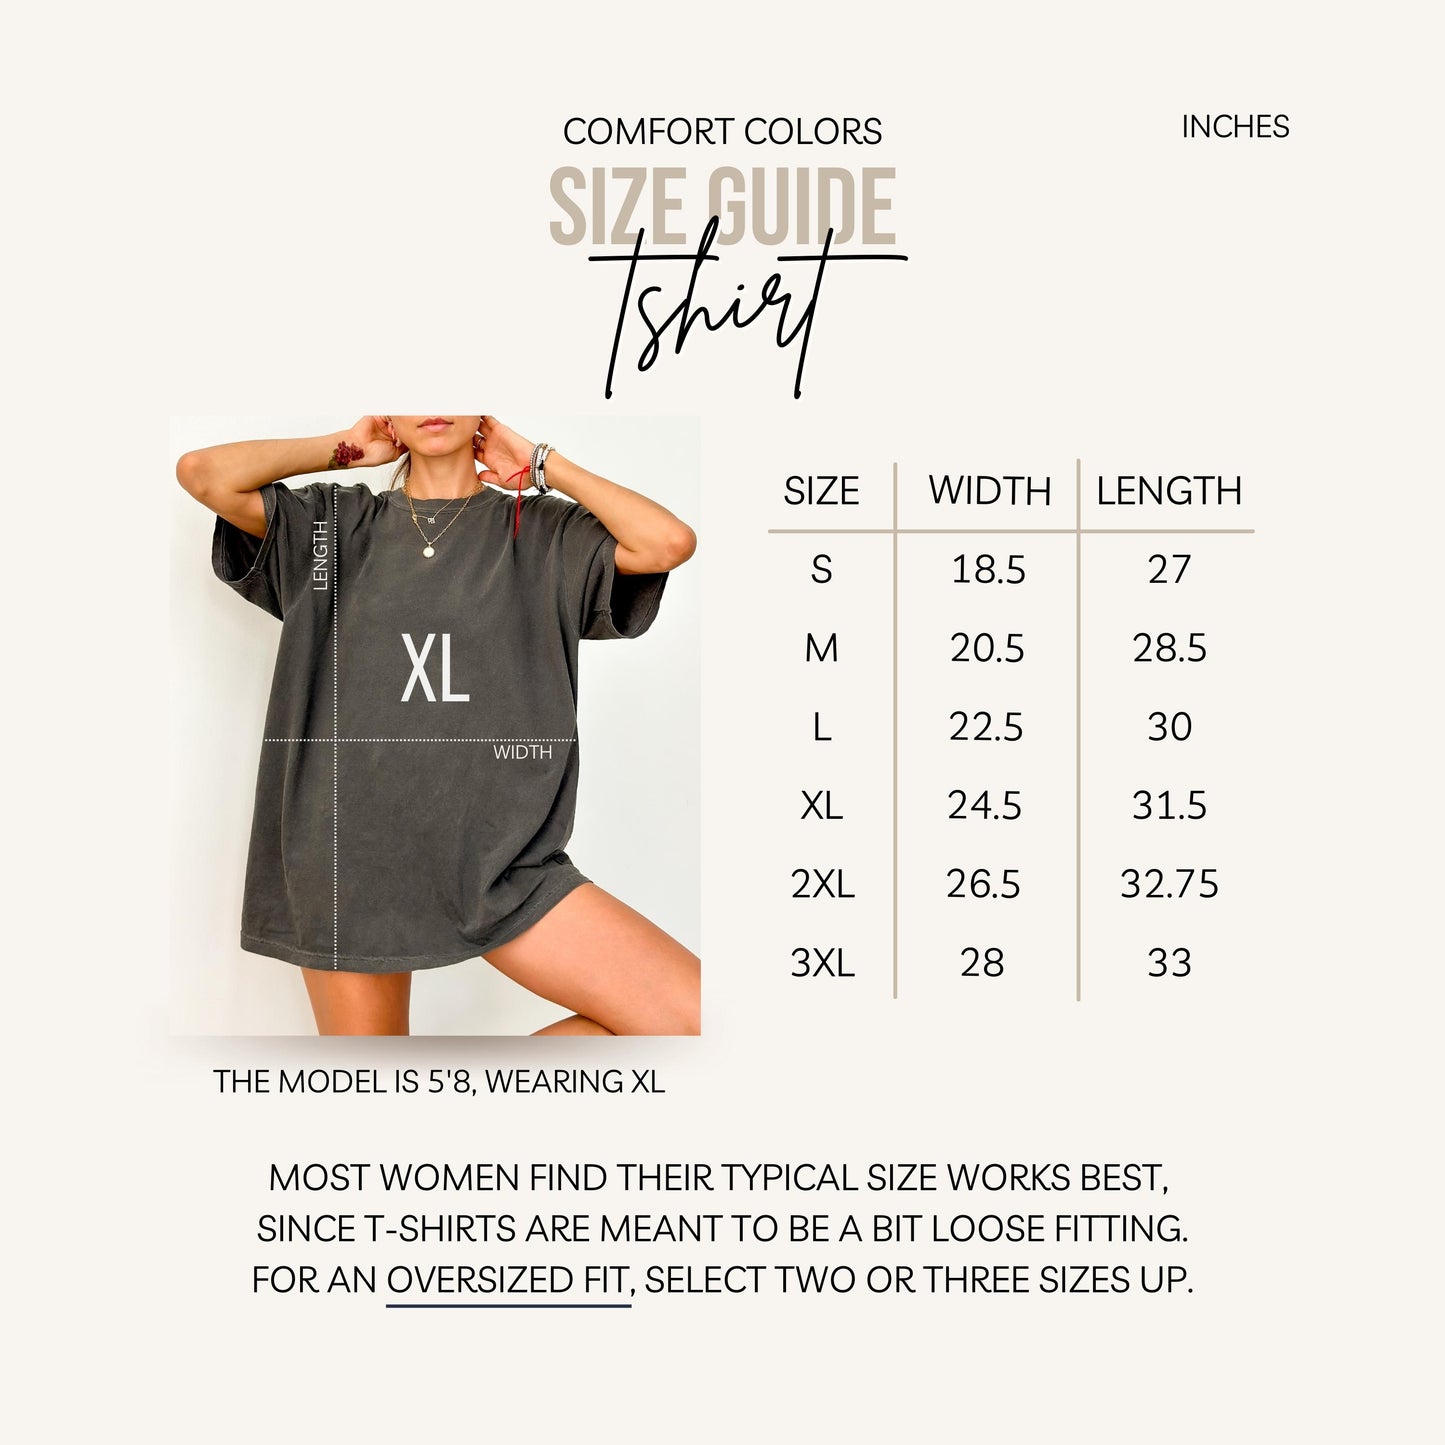 KEEP GOING: COMFORT COLORS Unisex T-shirt in PEPPER